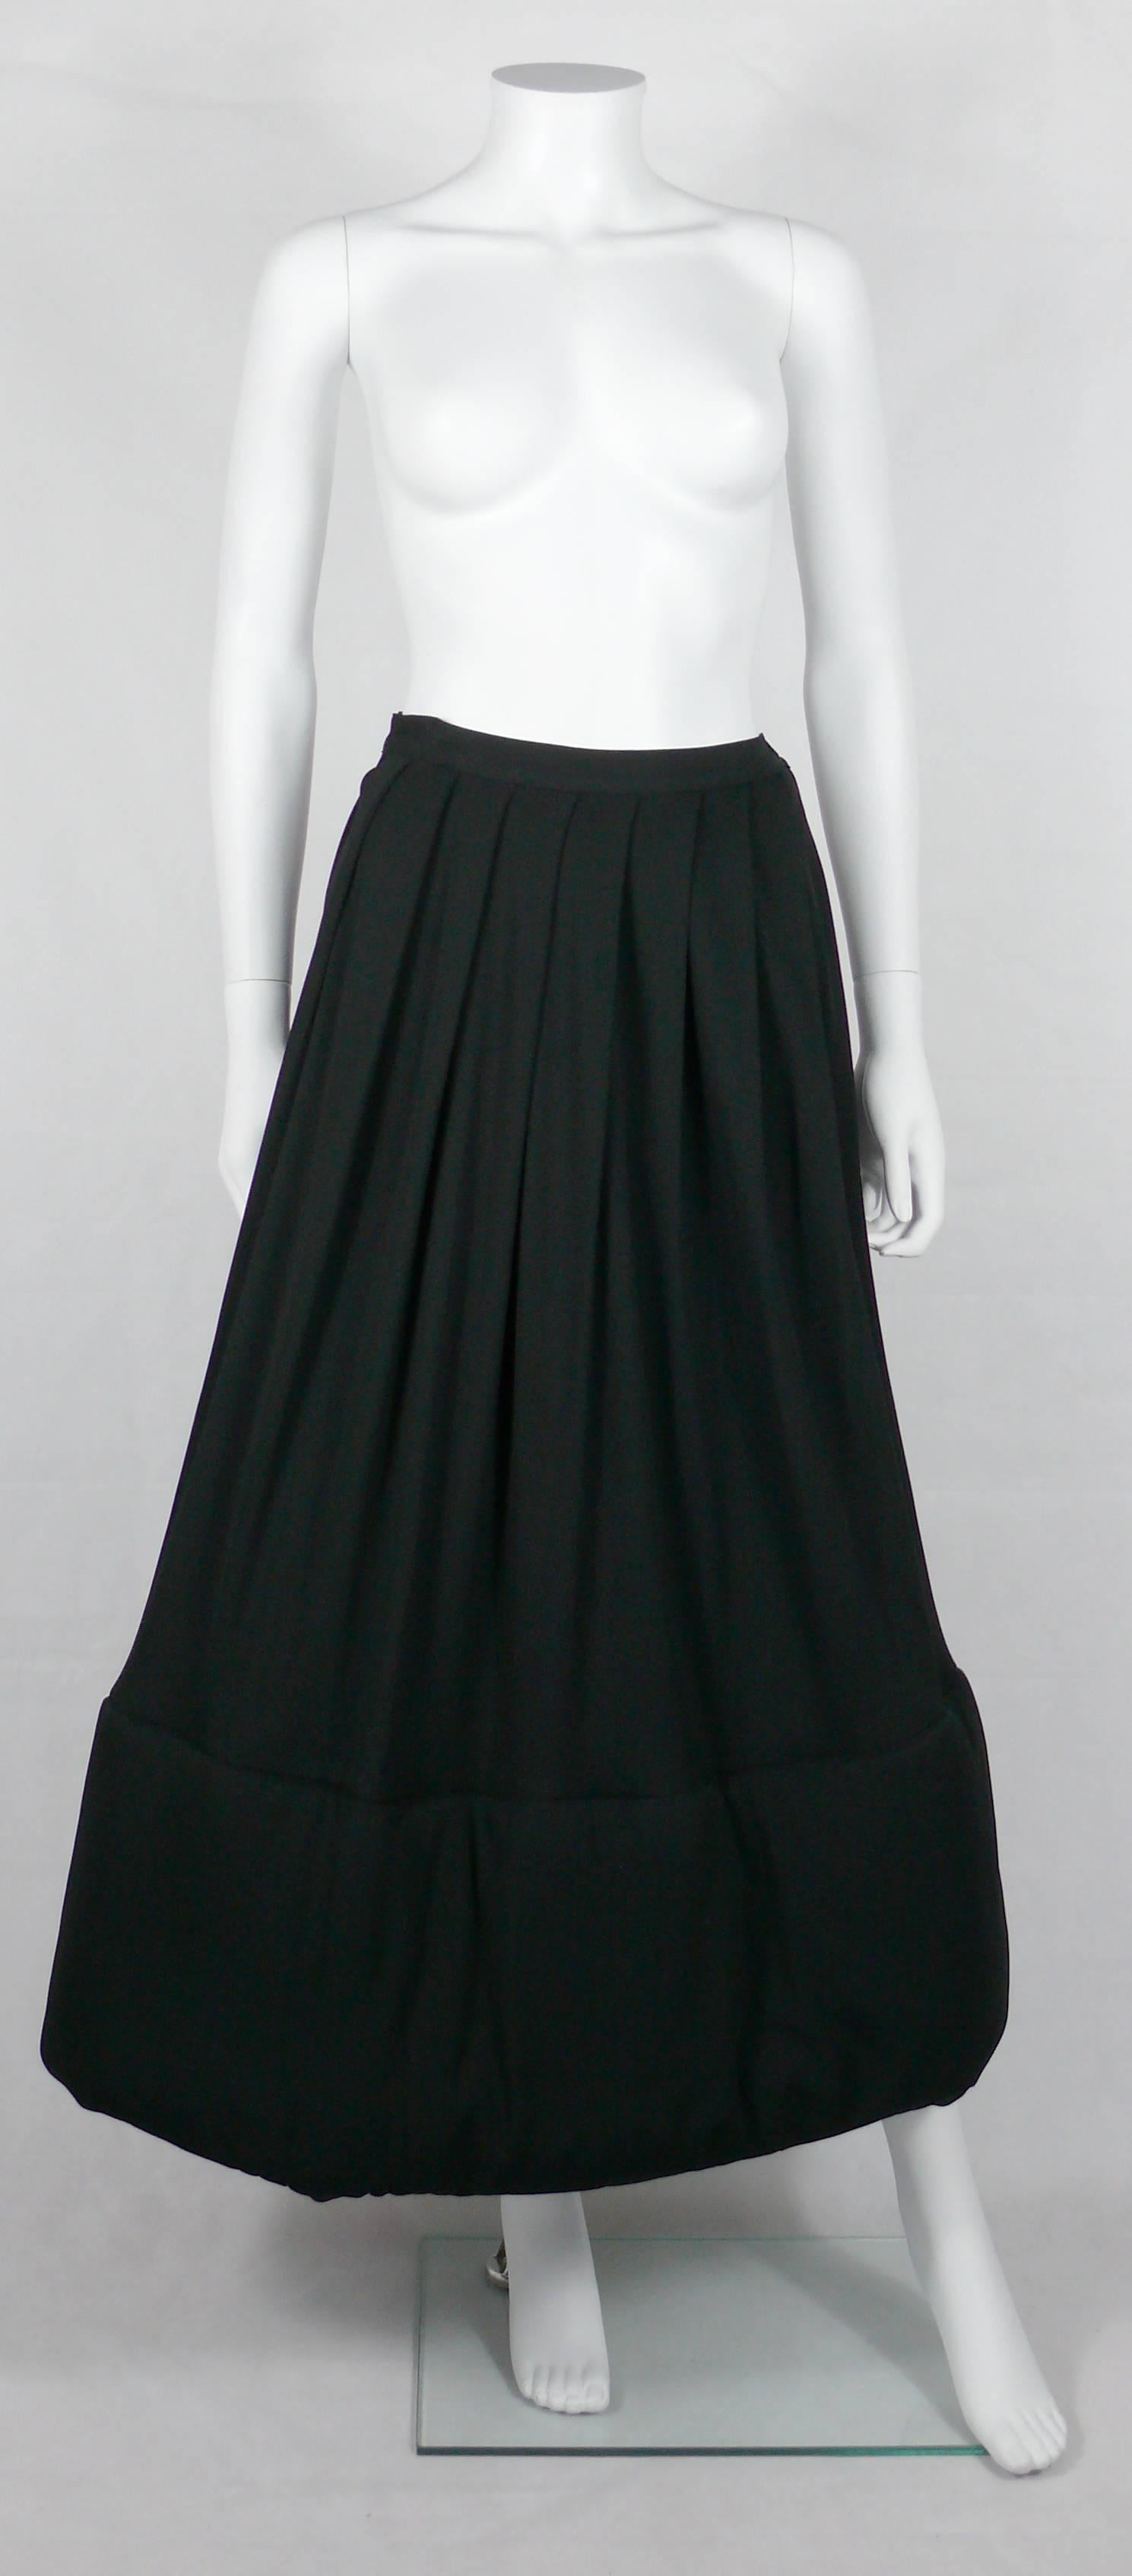 JEAN PAUL GAULTIER Classique vintage 1990s rare black pleated long skirt featuring a lower wide  padding section.

Side zip and one button.

Label reads JEAN PAUL GAULTIER Classique Made in Italy.

Marked Size : I 42 / D 38 / F 38 / GB 10 / USA